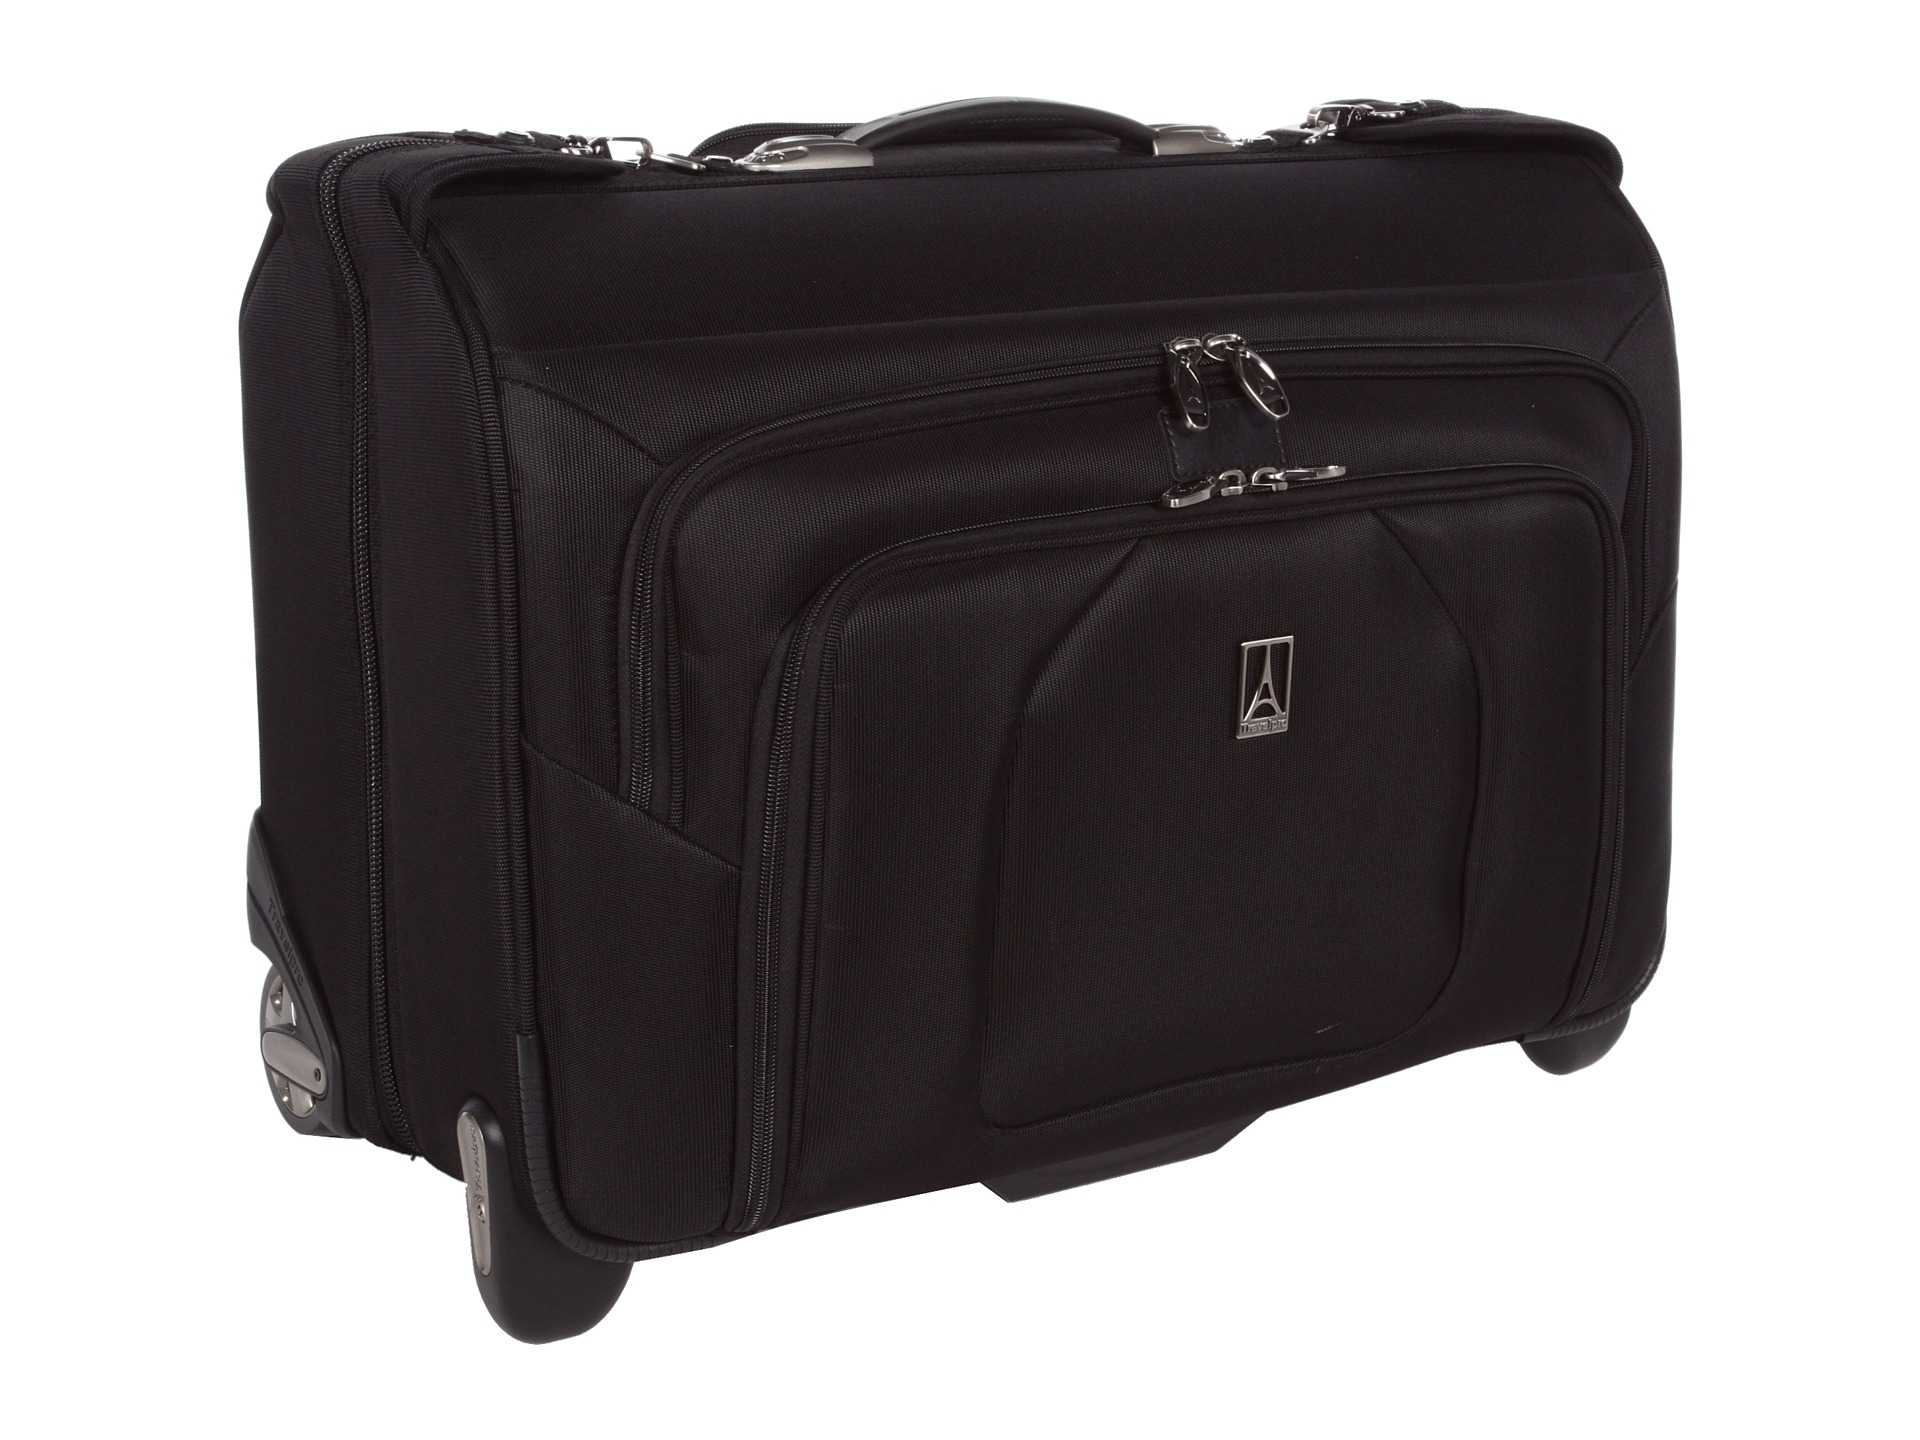 Travelpro Crew 9 Carry On Rolling Garment Bag | Shipped Free at Zappos